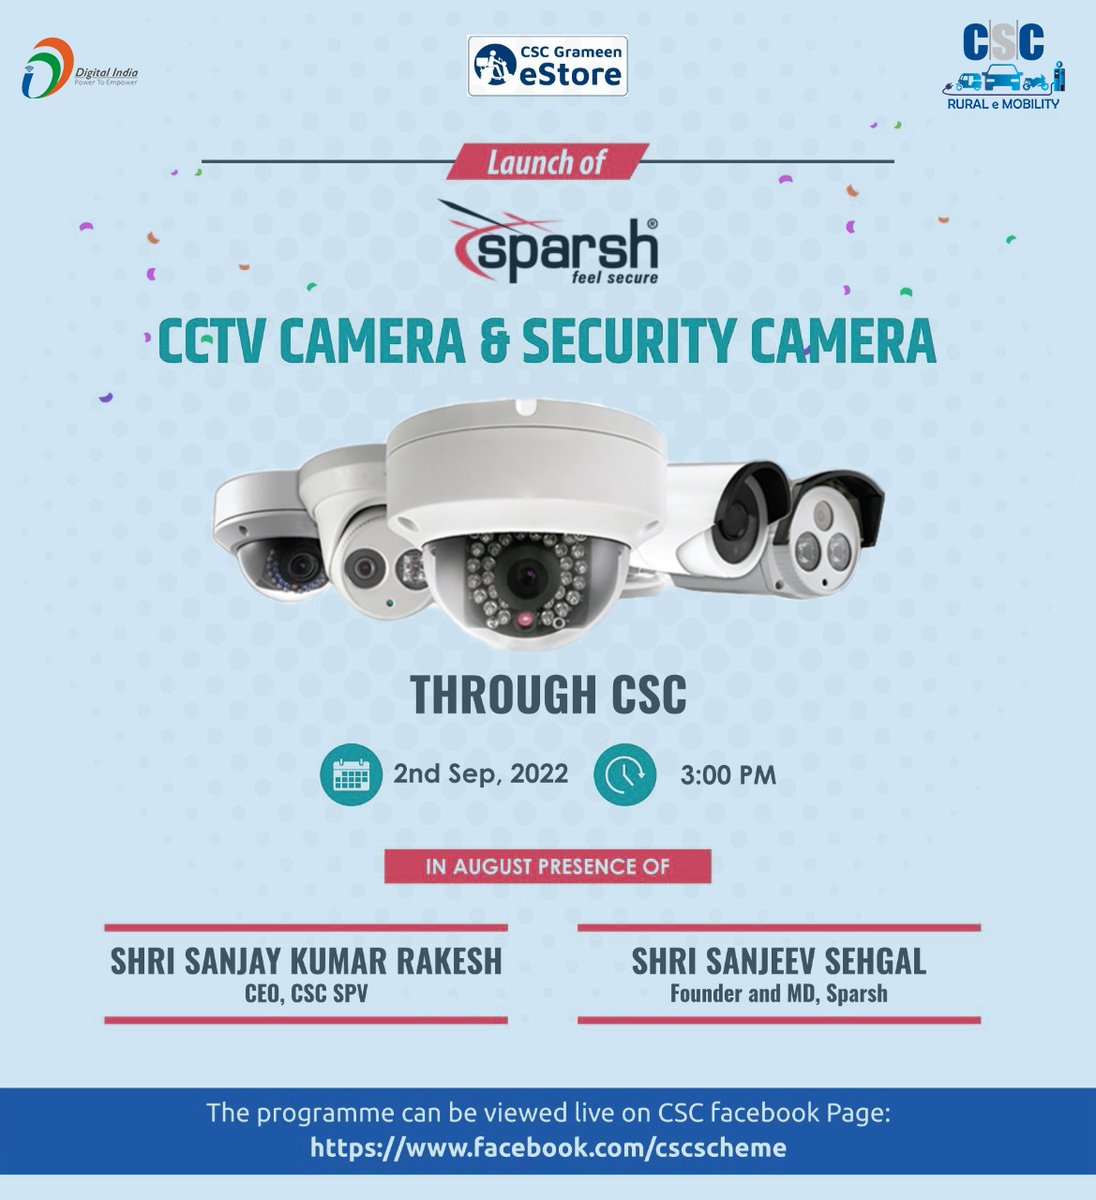 Launch of SPARSH CCTV CAMERA & SECURITY CAMERA THROUGH CSC...

Join us LIVE on the #CSC Facebook Page(today), 2nd September 2022 at 3 PM.

#DigitalIndia #RuralEmpowerment #SparshCCTV #SparshSecurity #FridayMotivation #FridayVibes